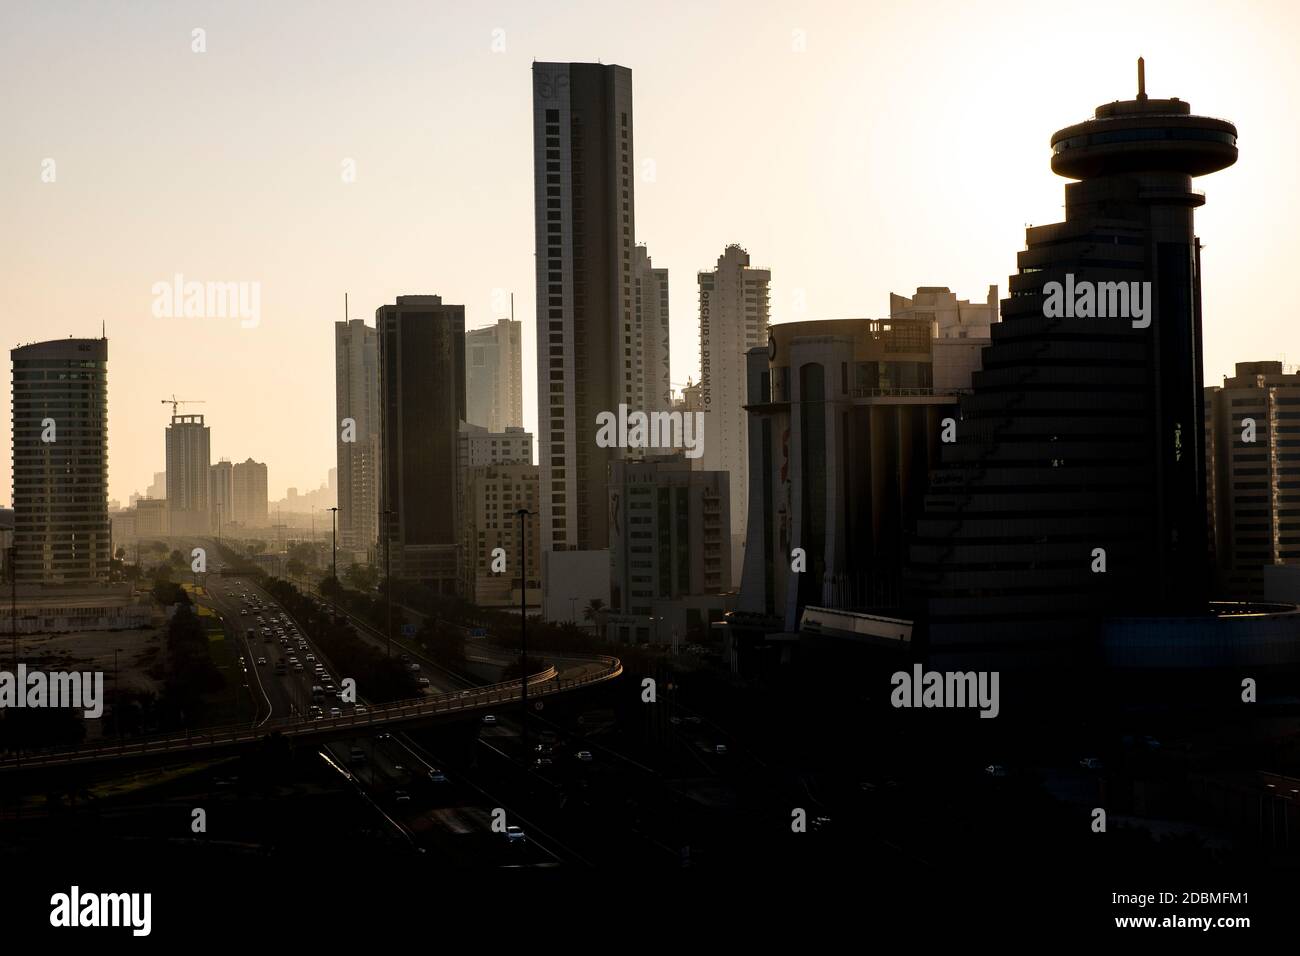 Bahrain Chamber of Commerce and Industry (BCCI) in Manama, Bahrain bei Sonnenaufgang Stockfoto